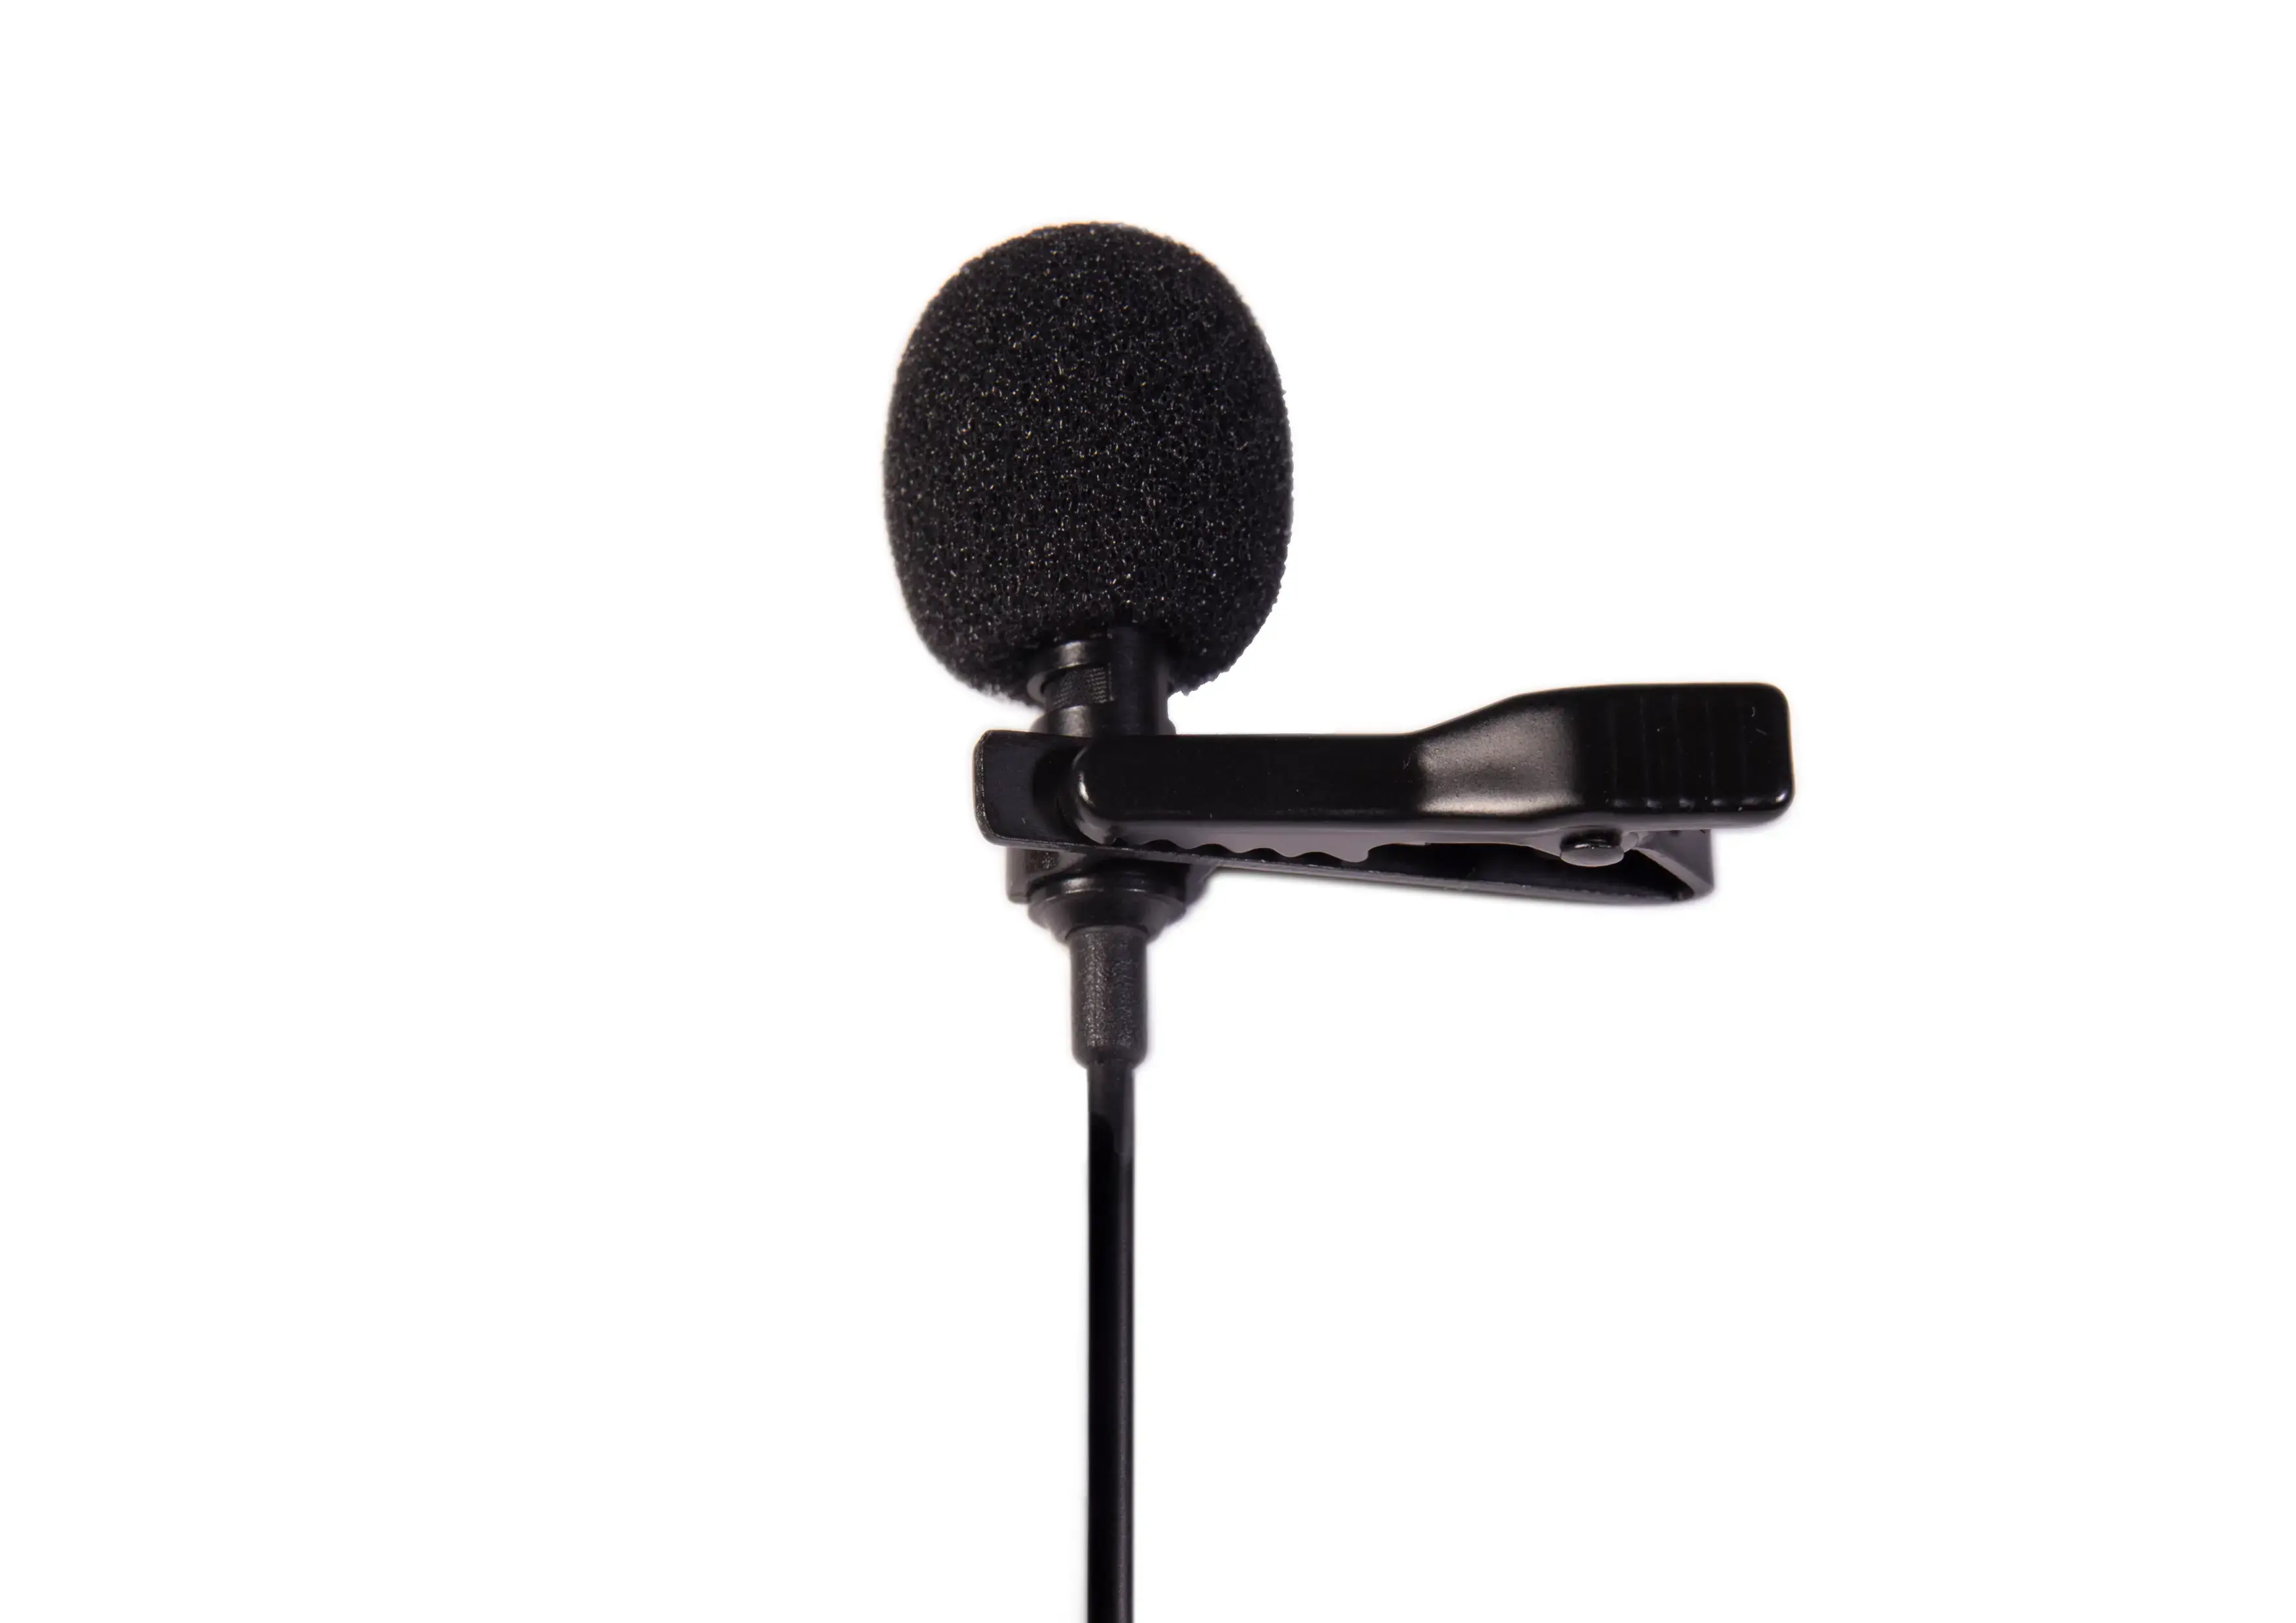 HM-01 SLR Camera Clip Microphone is a Must-Have for Video Creators